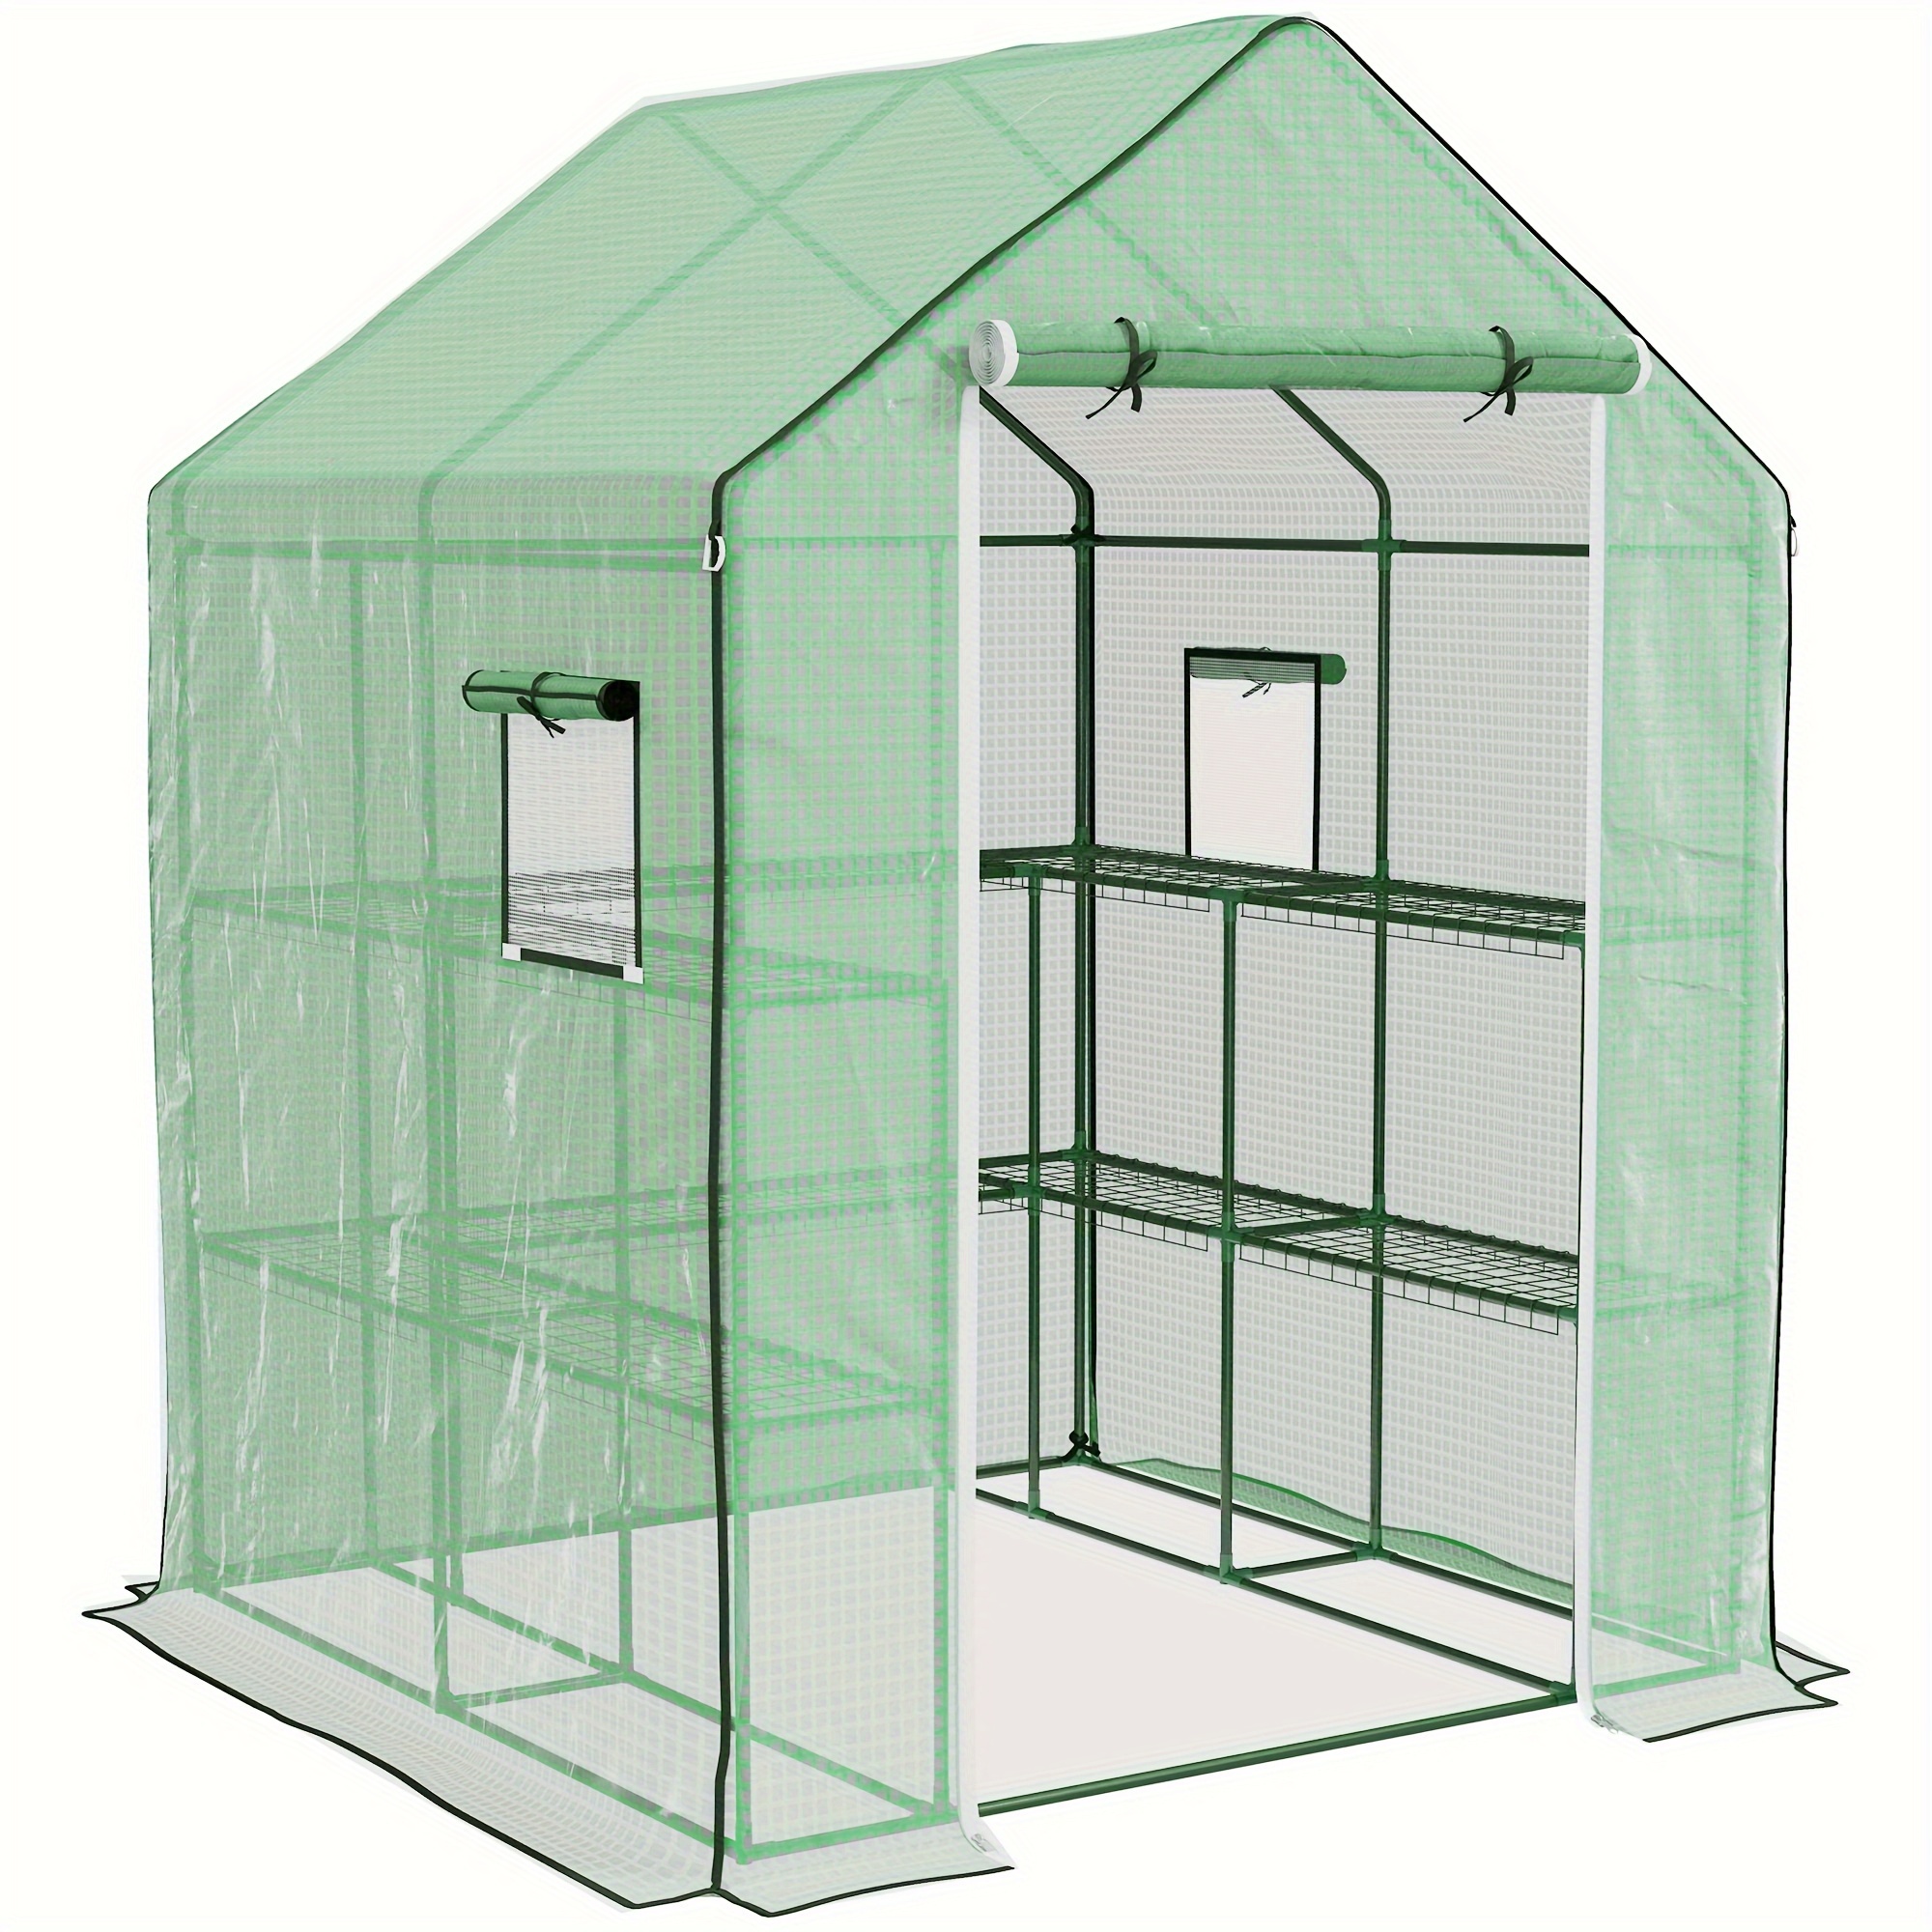 

Outsunny 4.6' X 4.7' Portable Greenhouse, Water/uv Resistant Walk-in Small Outdoor Green House With 2 Tier U-shaped Flower Rack Shelves, Roll Up Door & Windows, Green